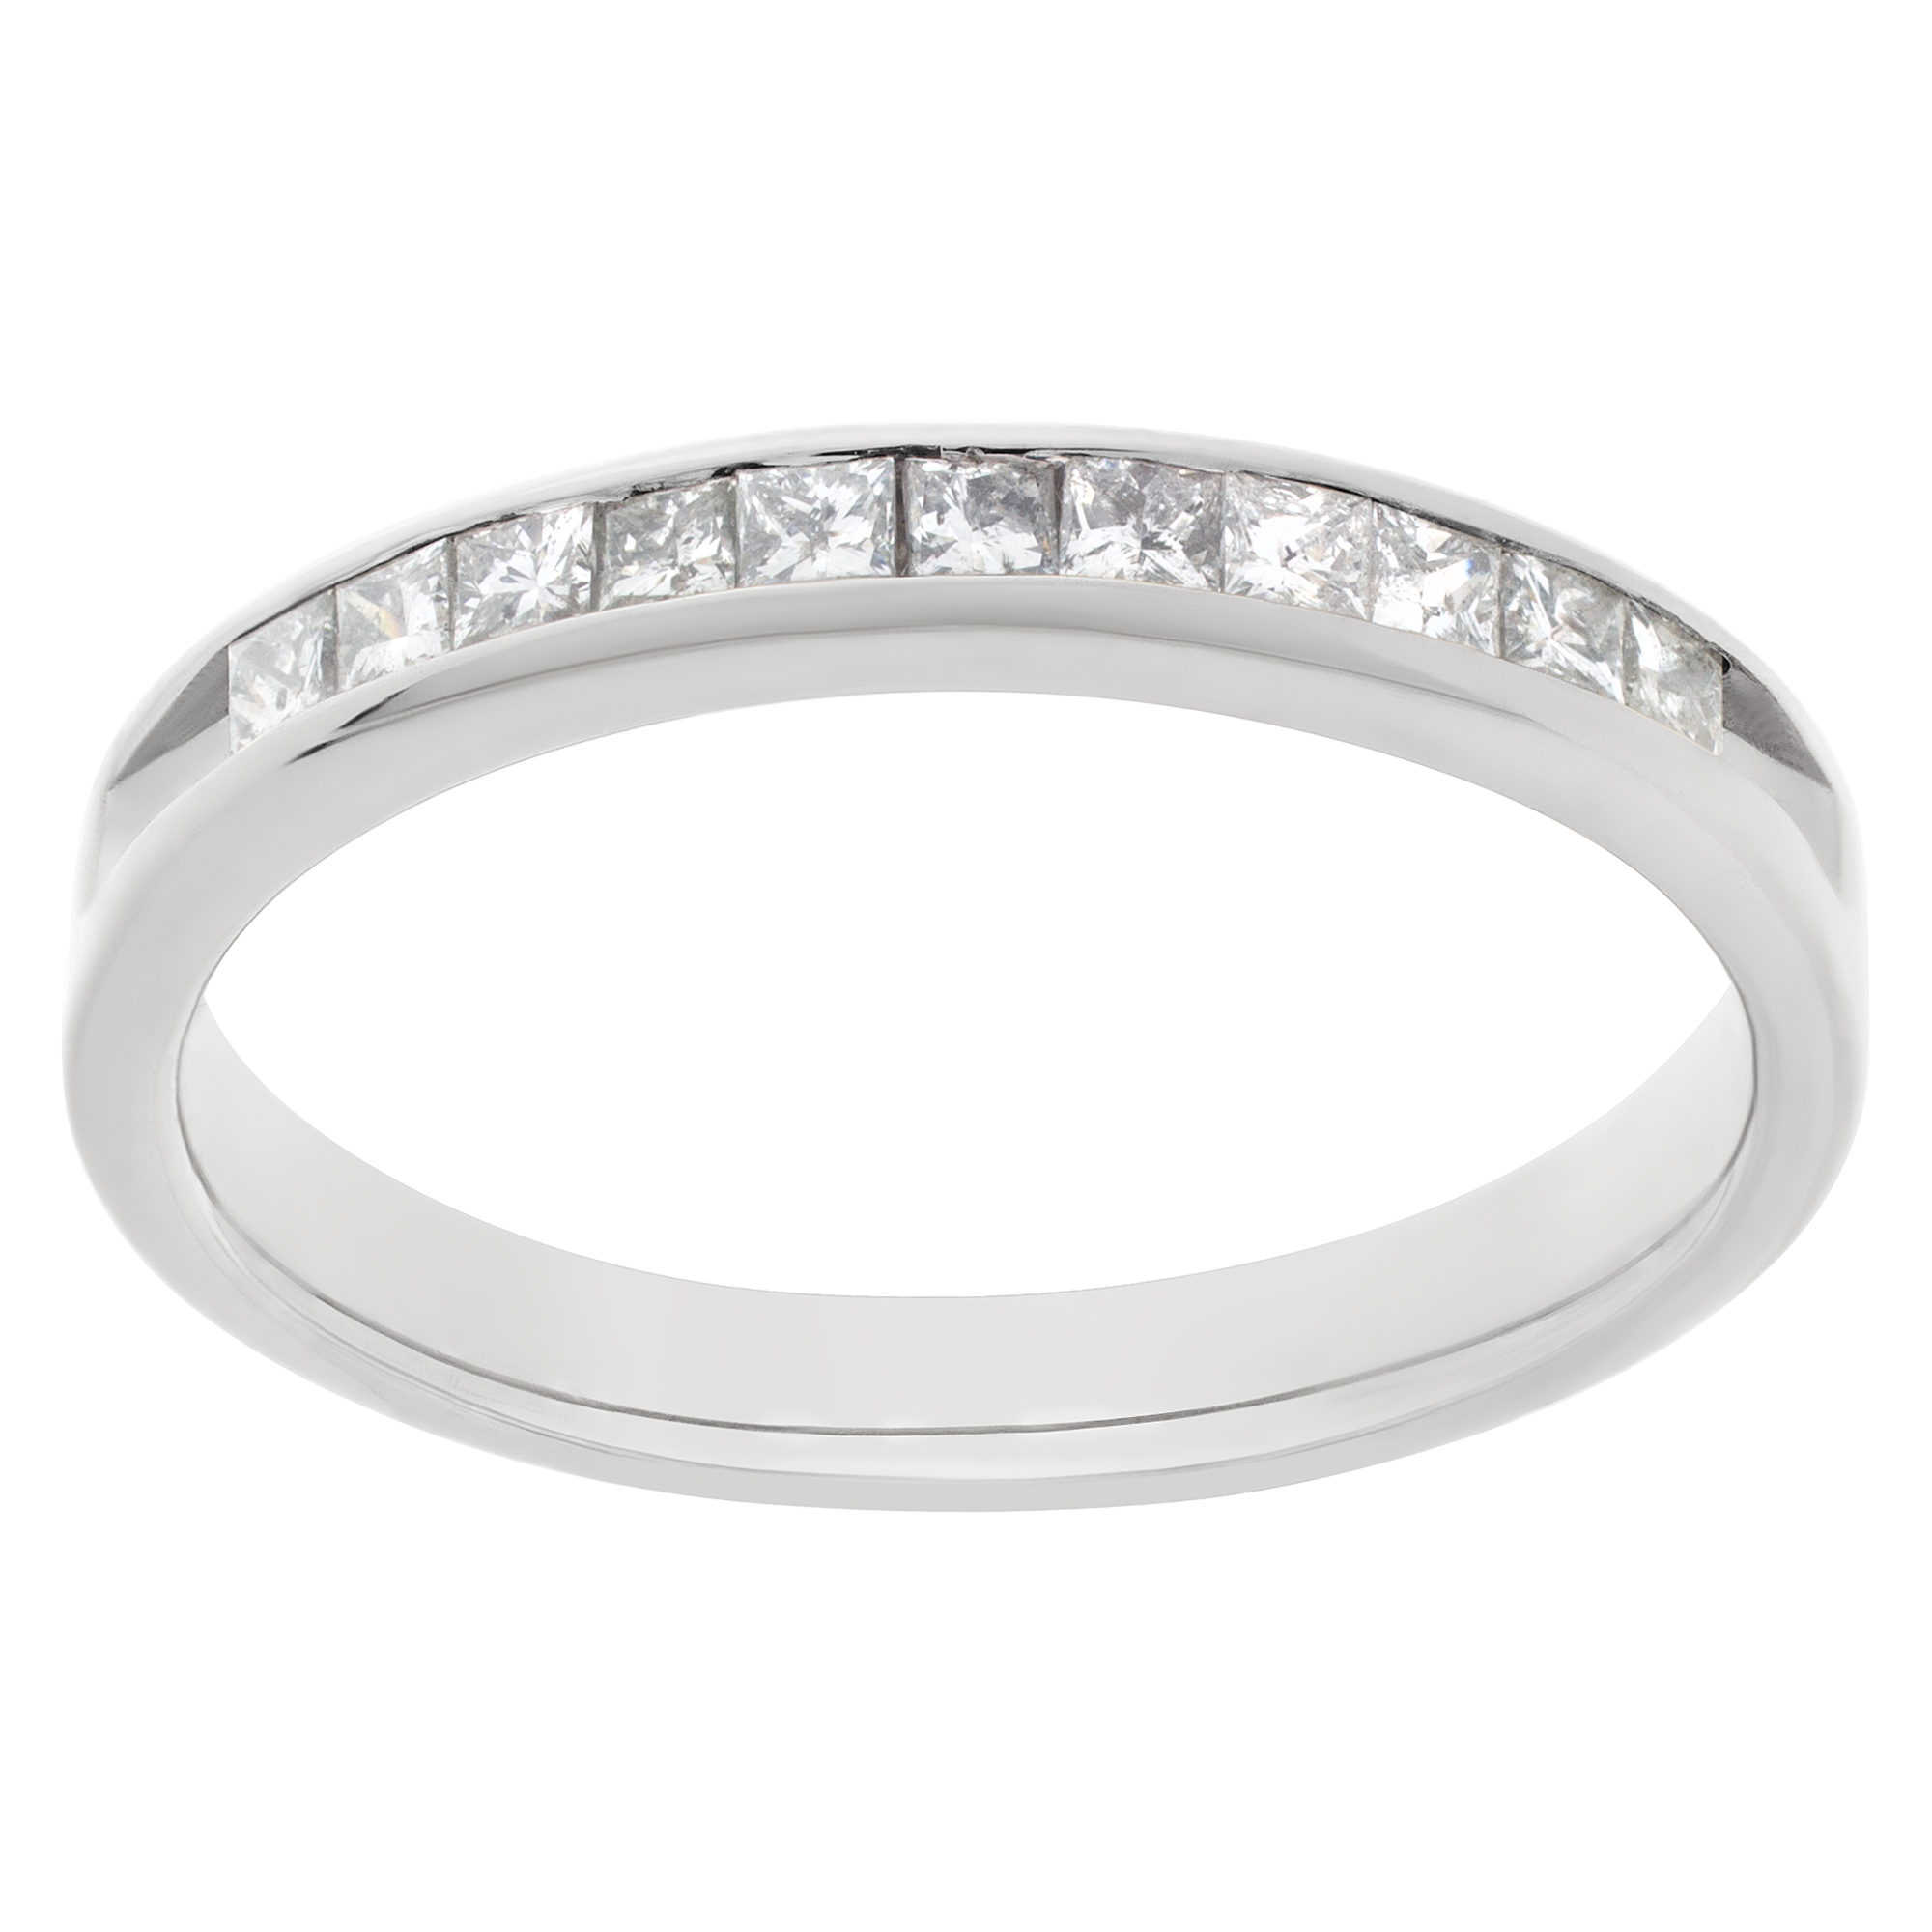 Semi Diamond Eternity Band and Ring in 14k white gold. 0.55 carats in diamonds. Size 6.25